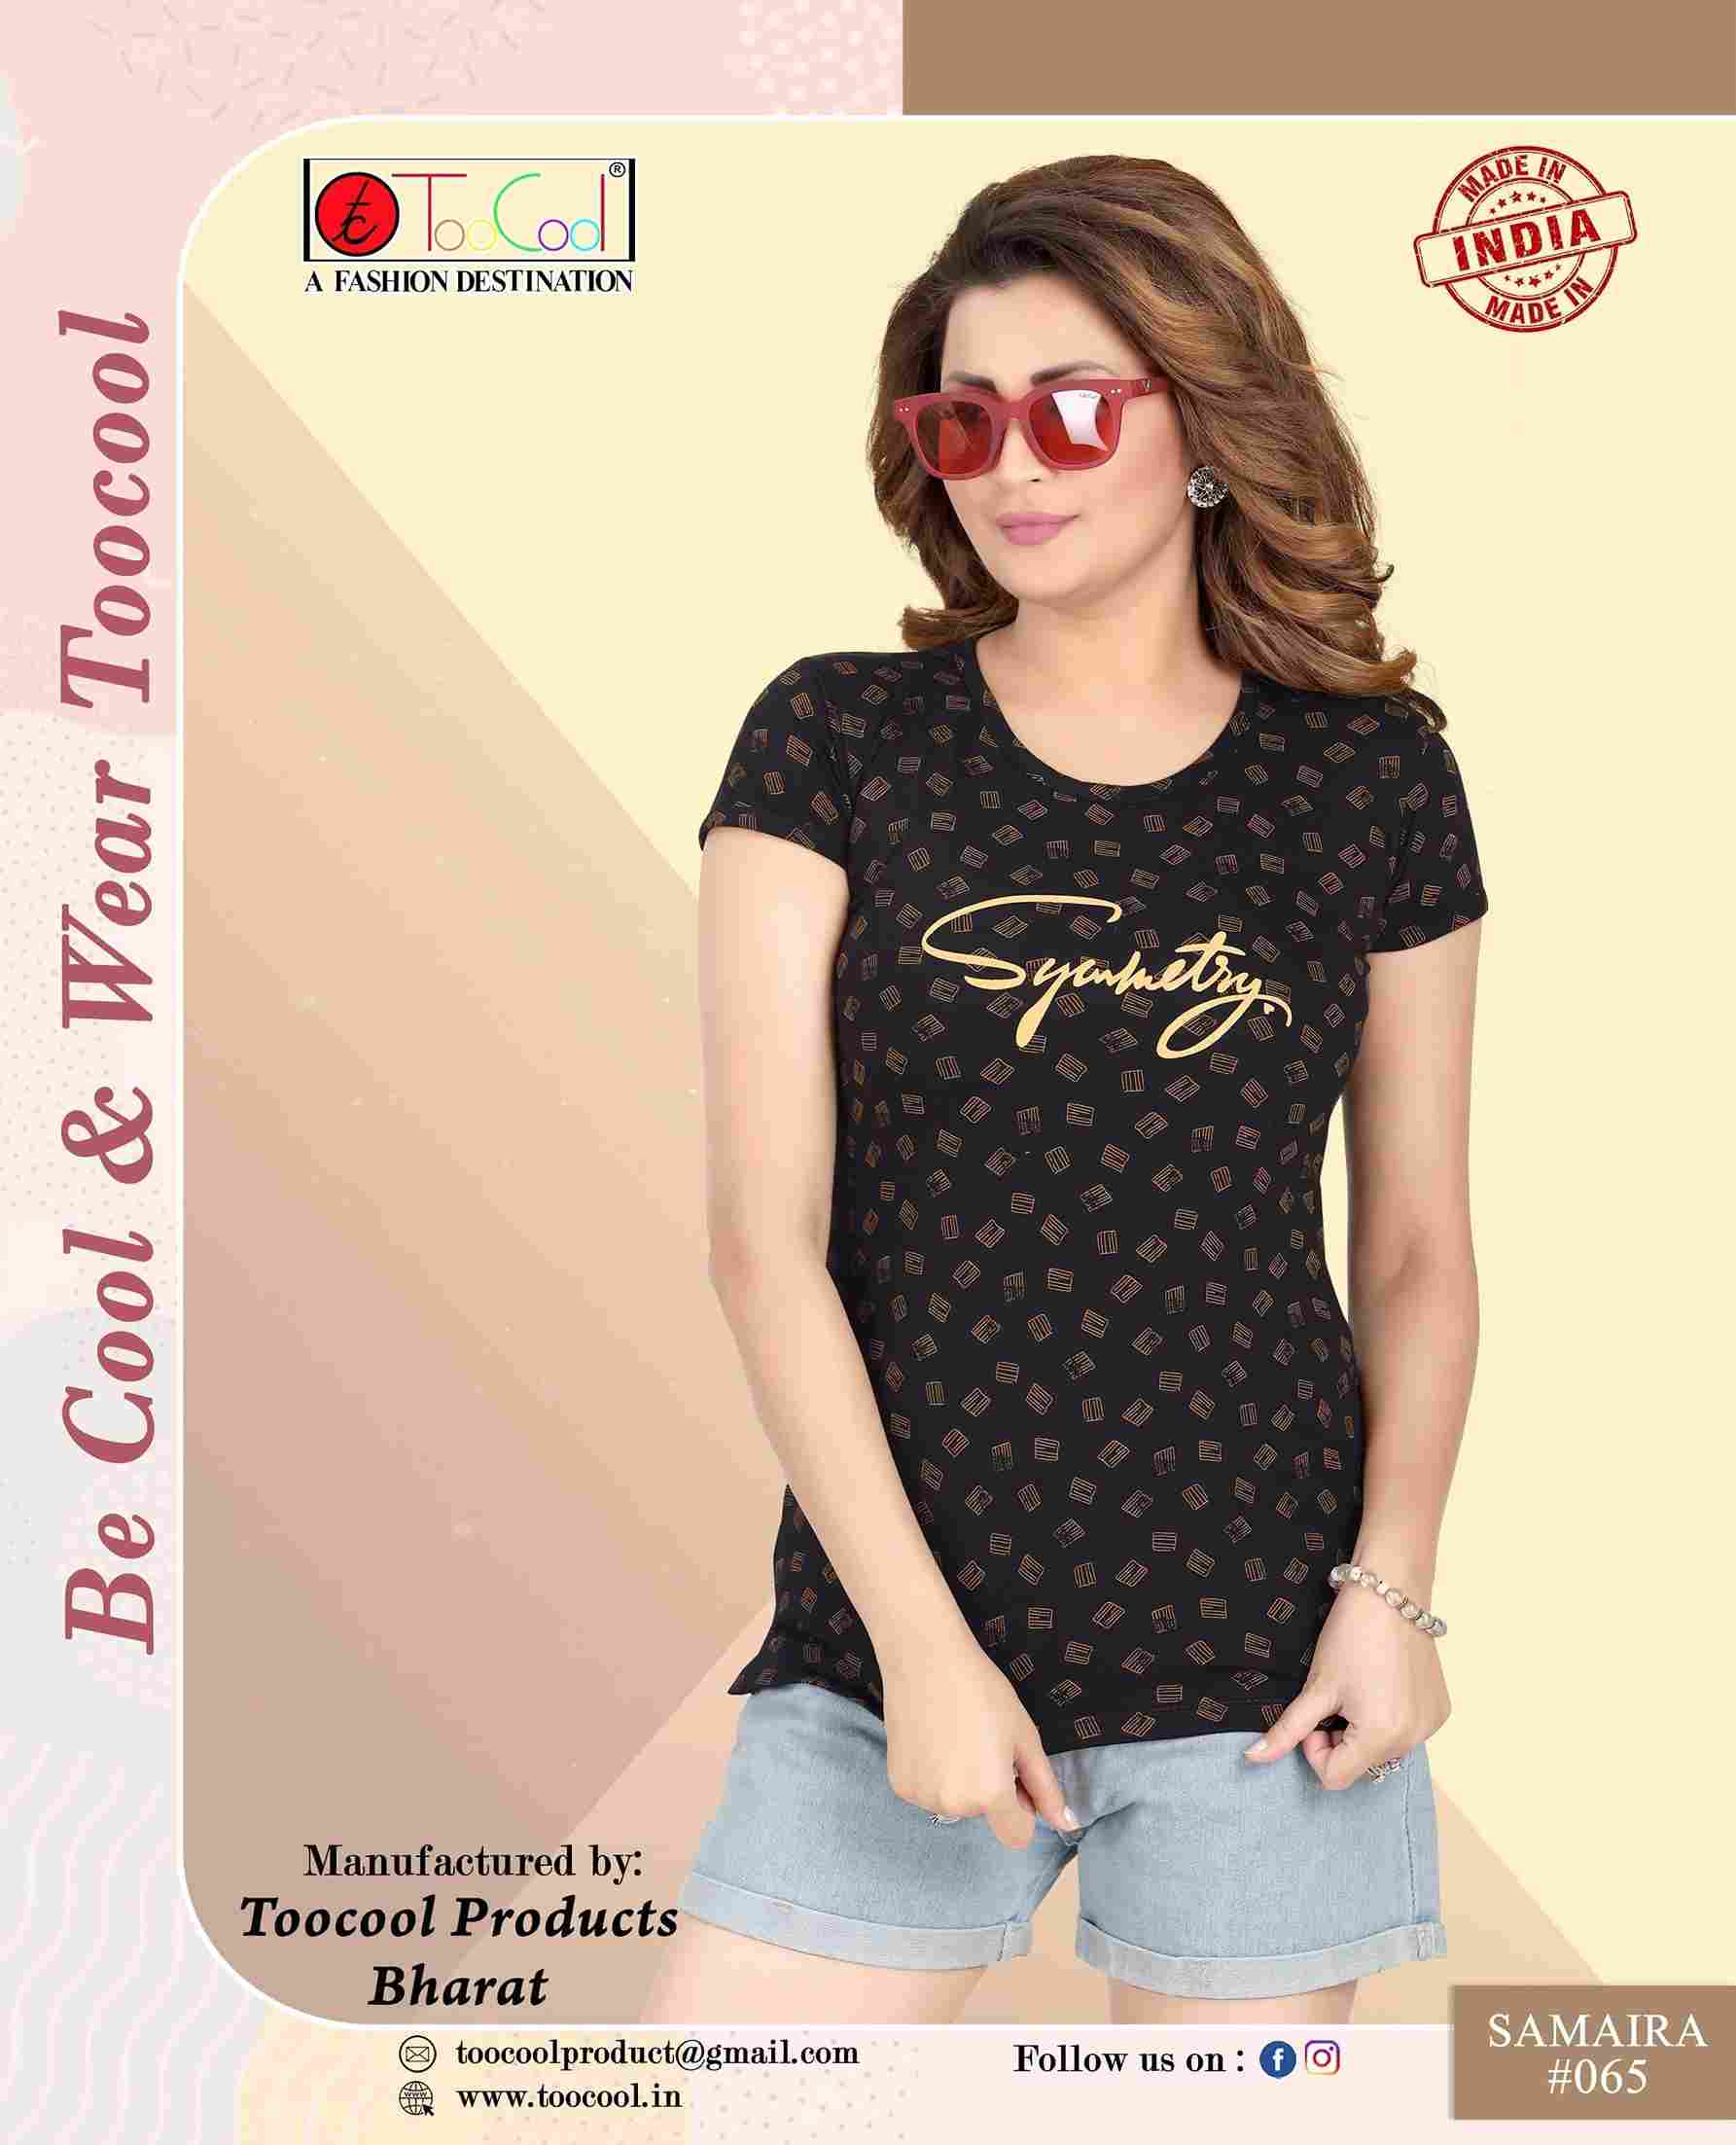 Best Hosiery Cotton Spandex T Shirt For womens